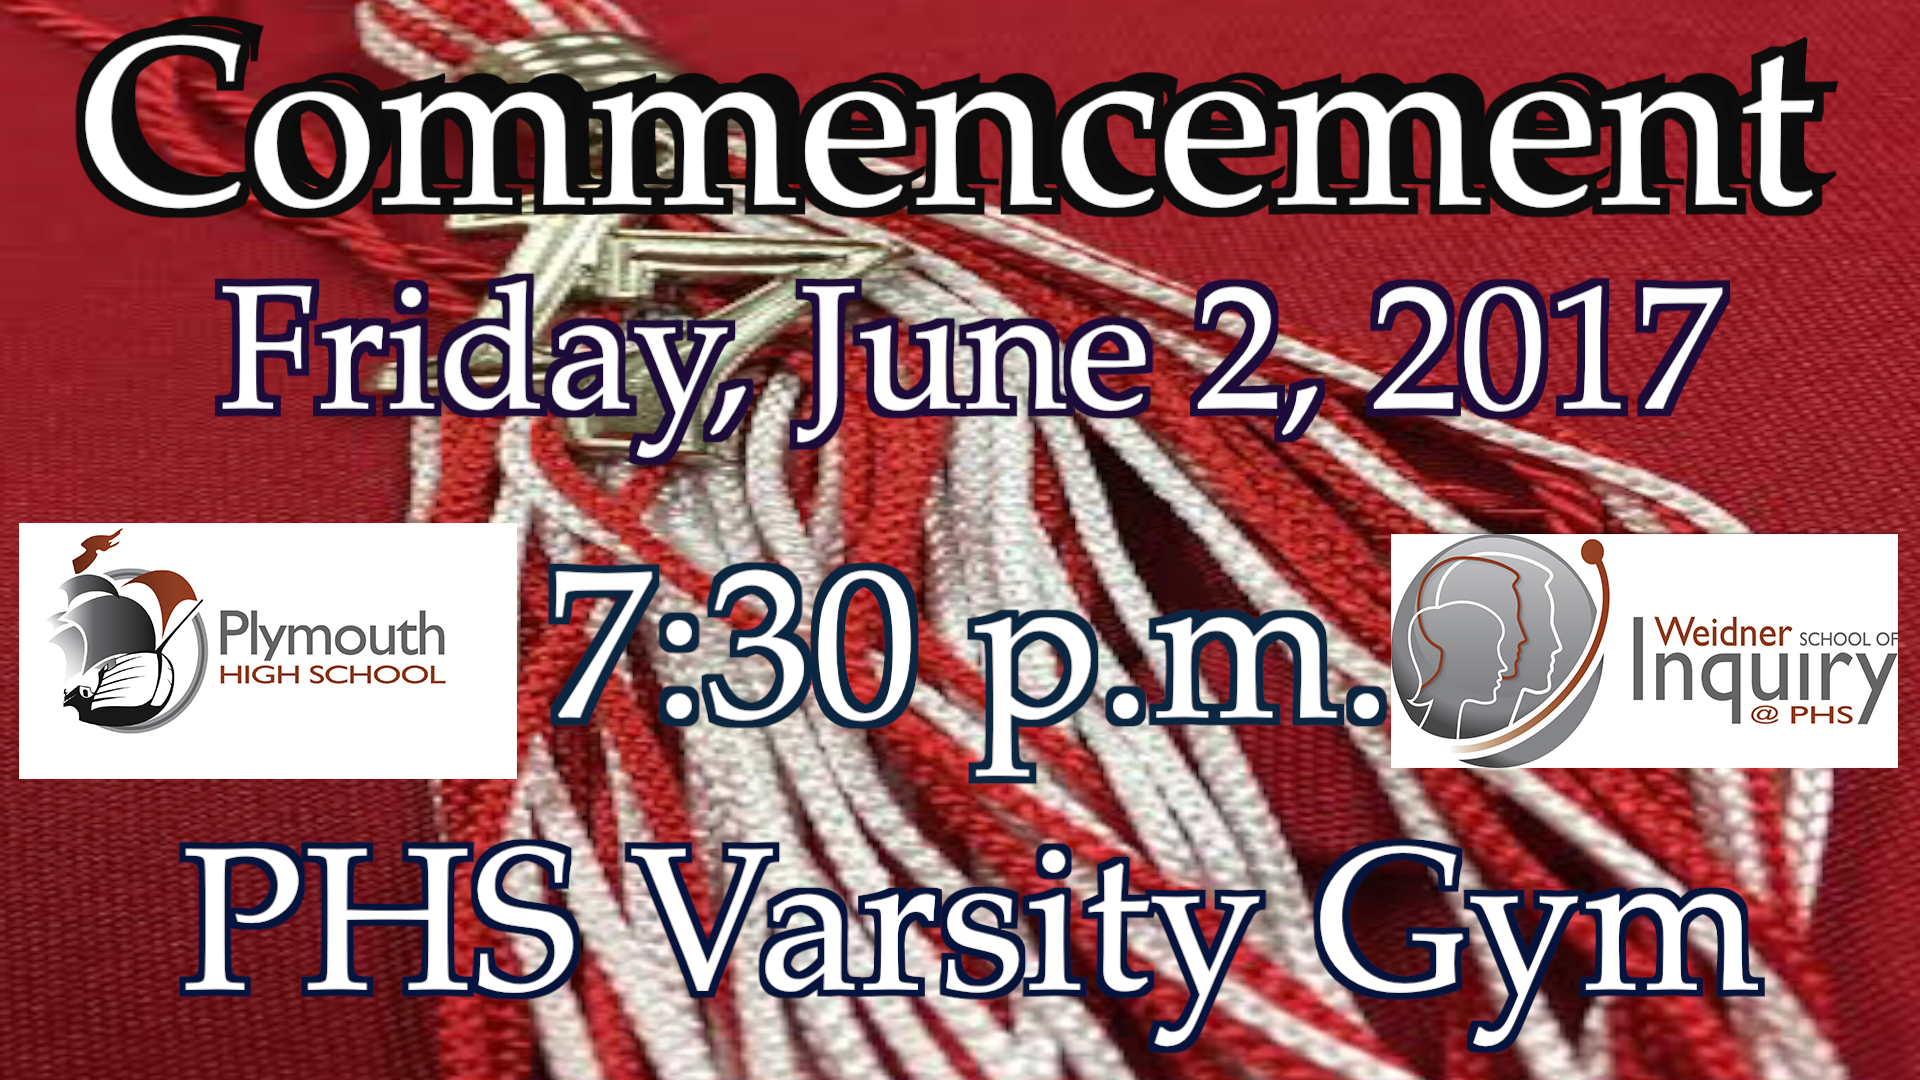 PHS Commencement Friday, June 2